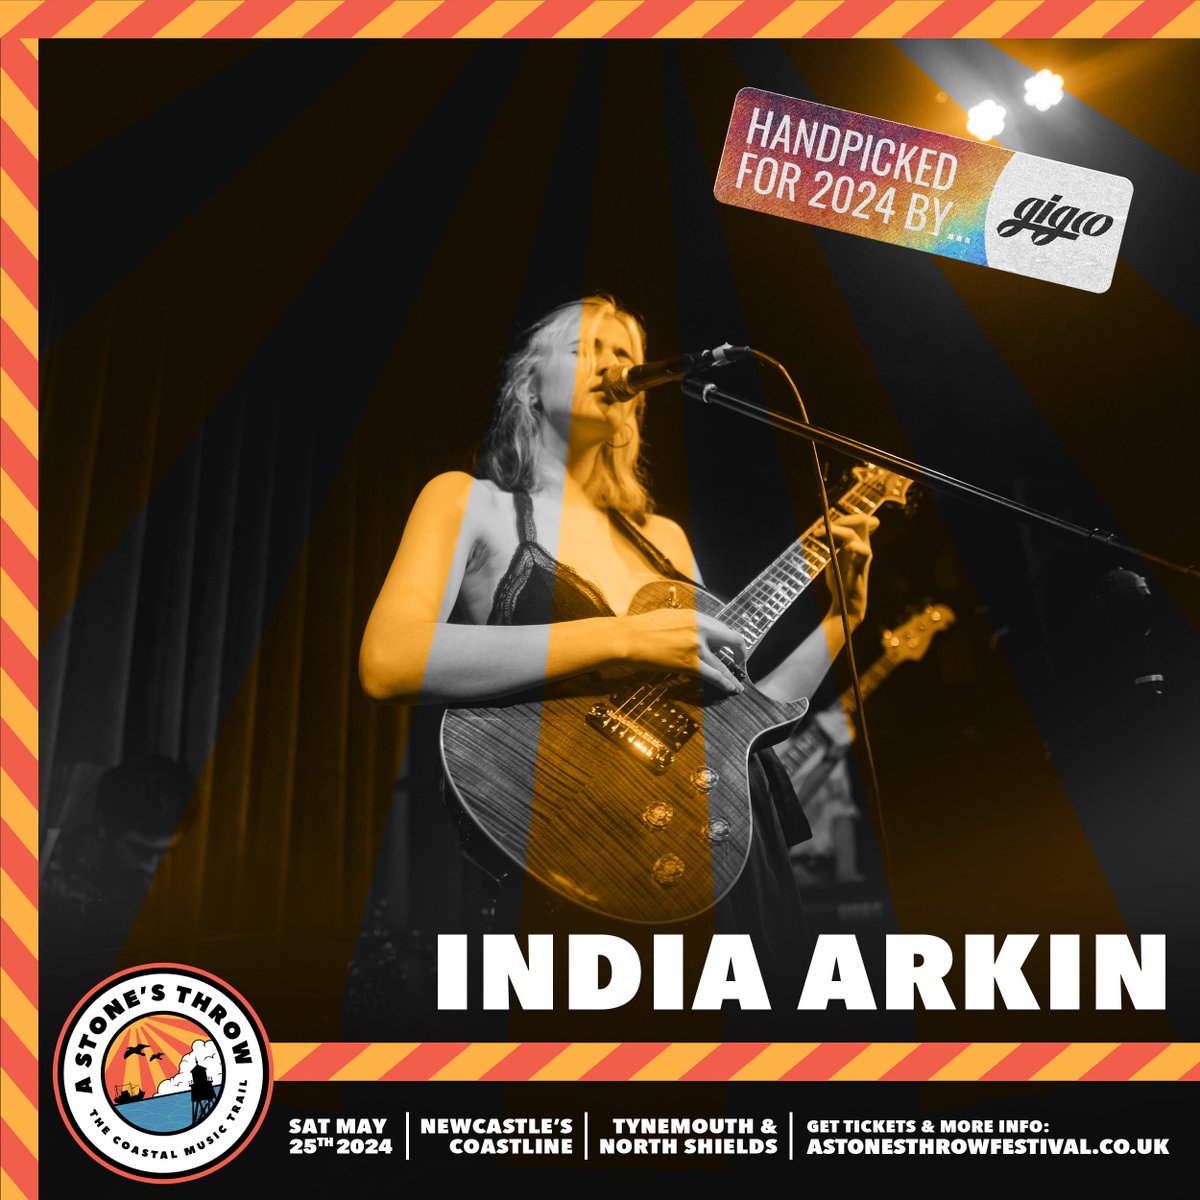 We were thrilled to be asked to champion some local artists for @ASTfestival this year. It wasn't easy, given the fantastic music scene here in the North East. However, @indiaarkin is a must-see if you have not yet had the pleasure!🎶✨ All info and ticket links in the App 📲